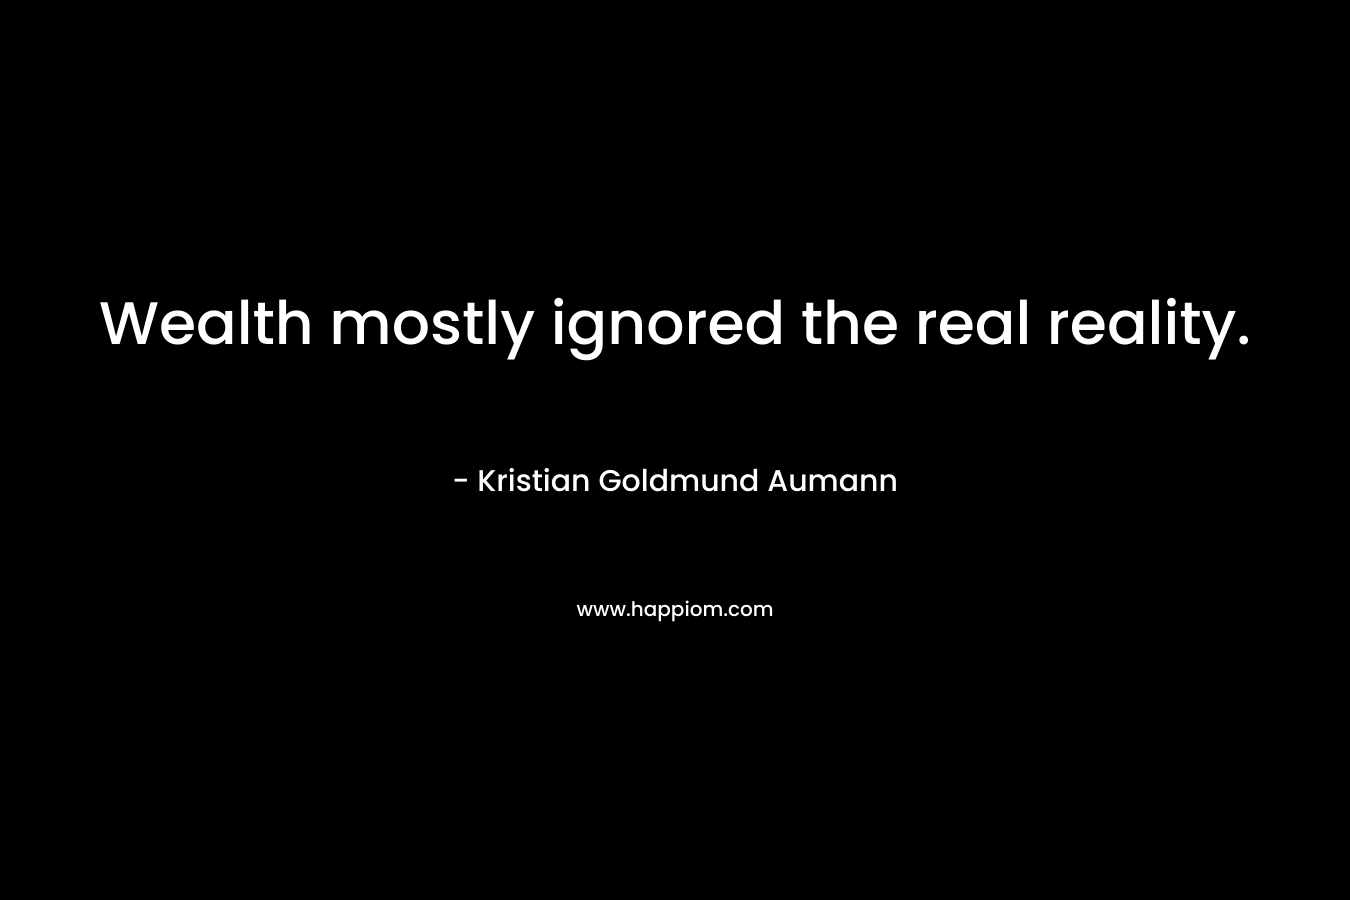 Wealth mostly ignored the real reality. – Kristian Goldmund Aumann